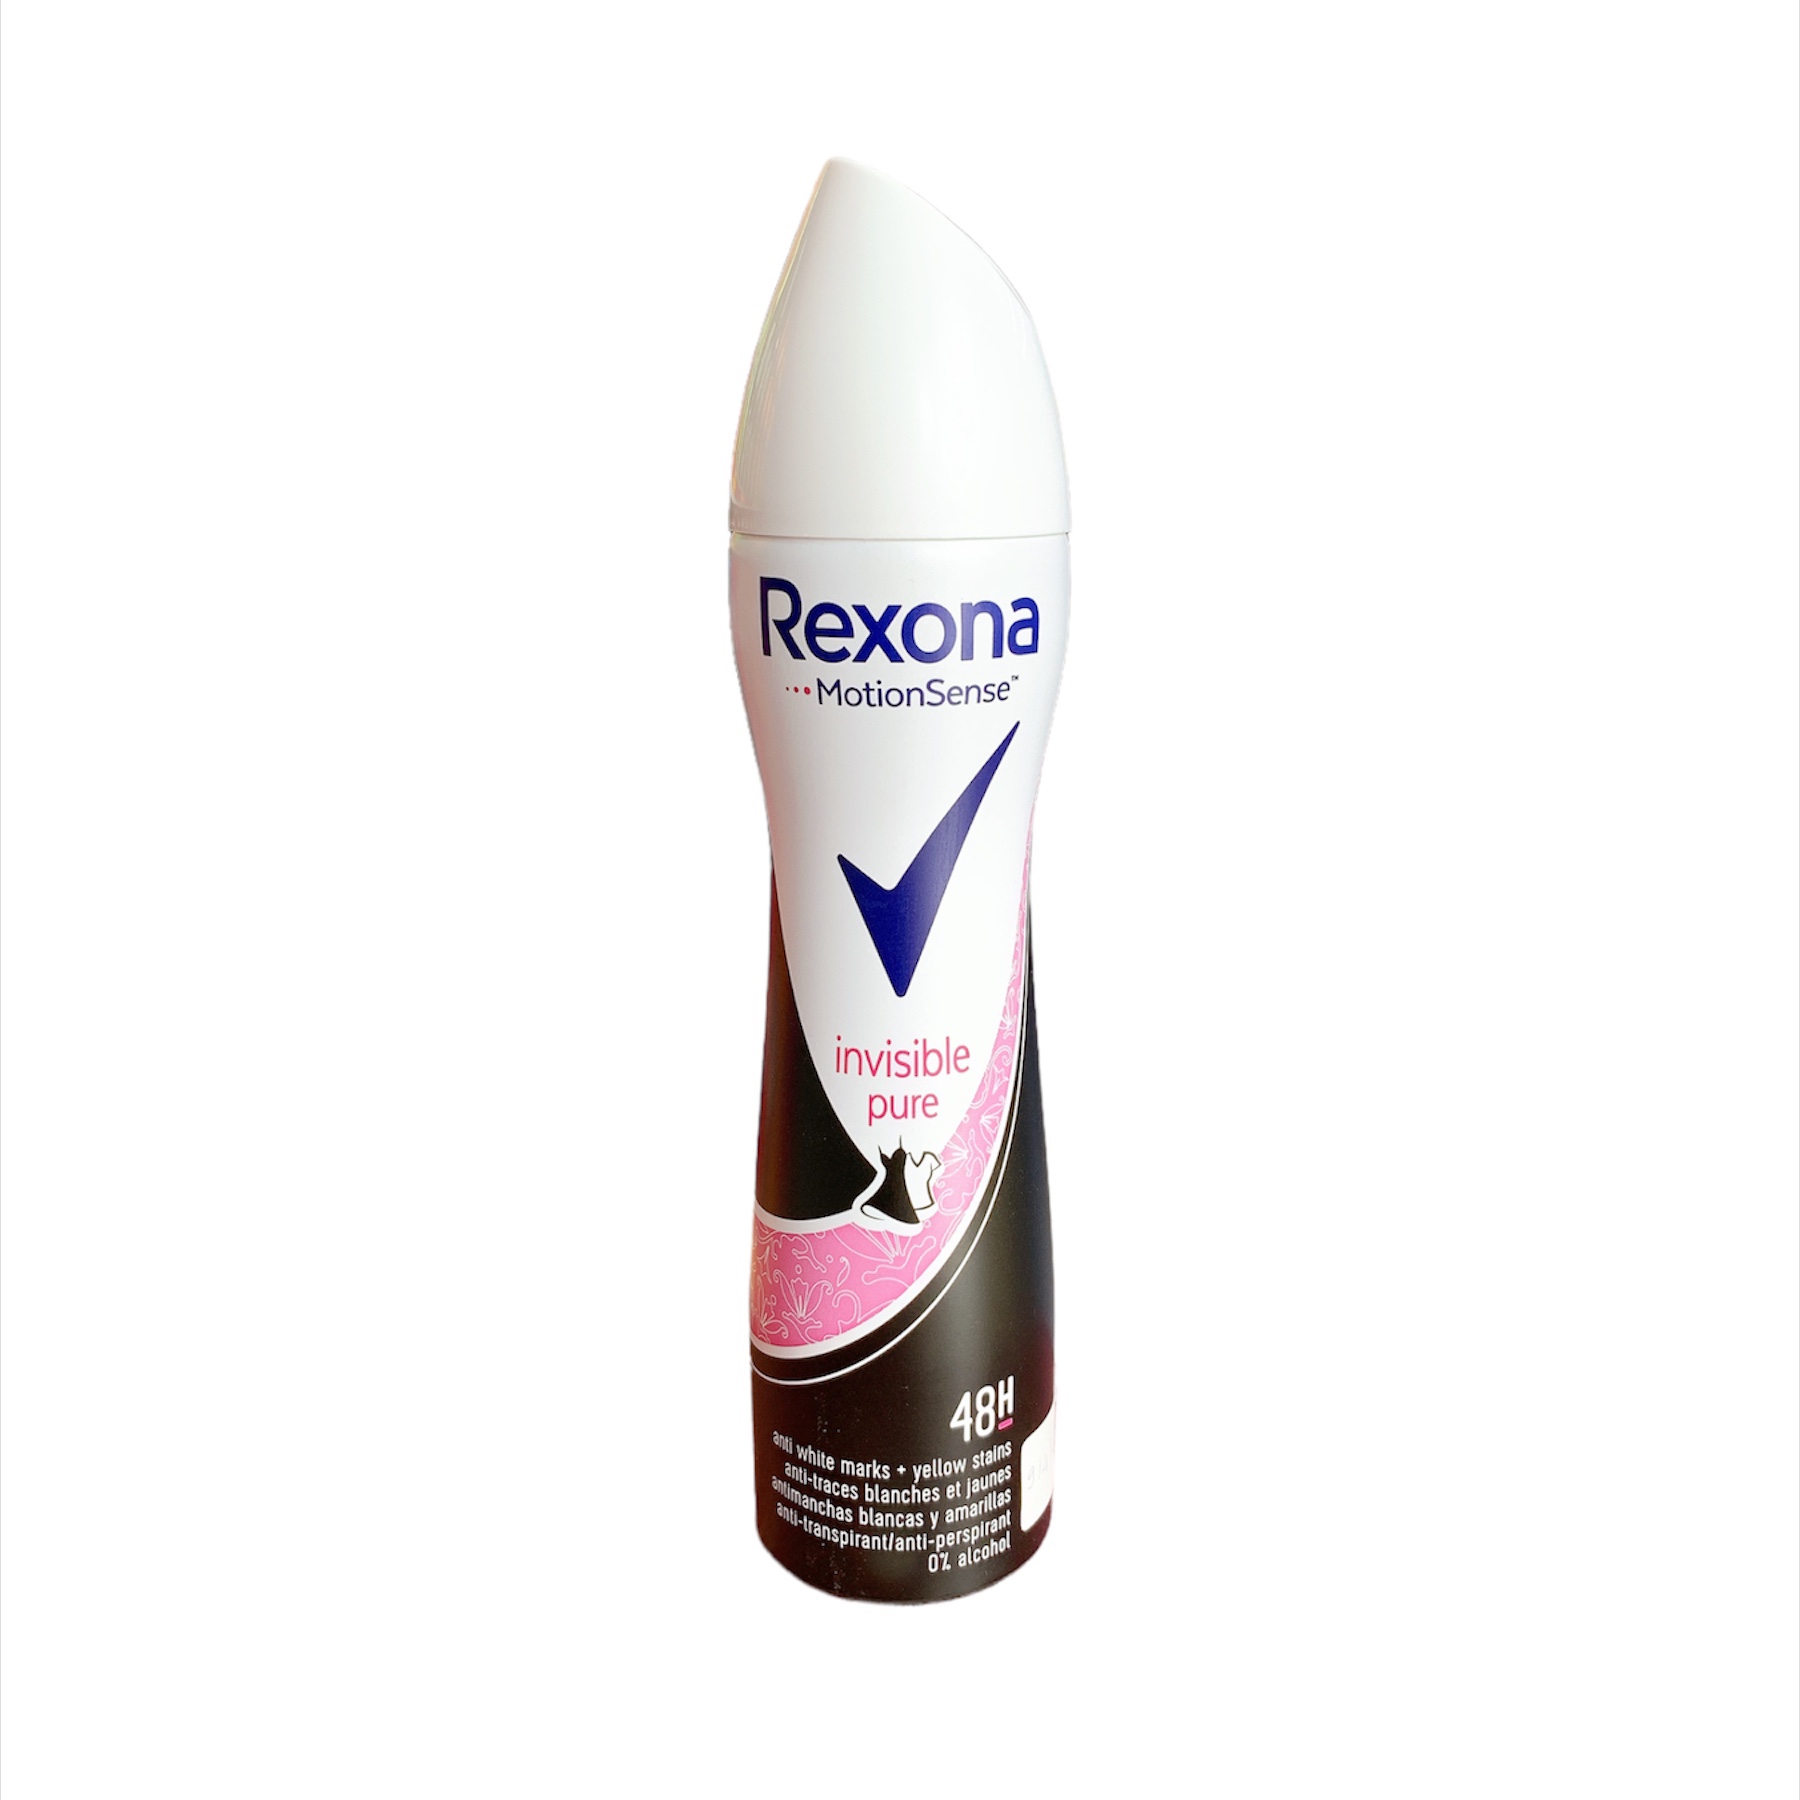 Xịt Body Rexona 48h - Invisible Pure 200ml